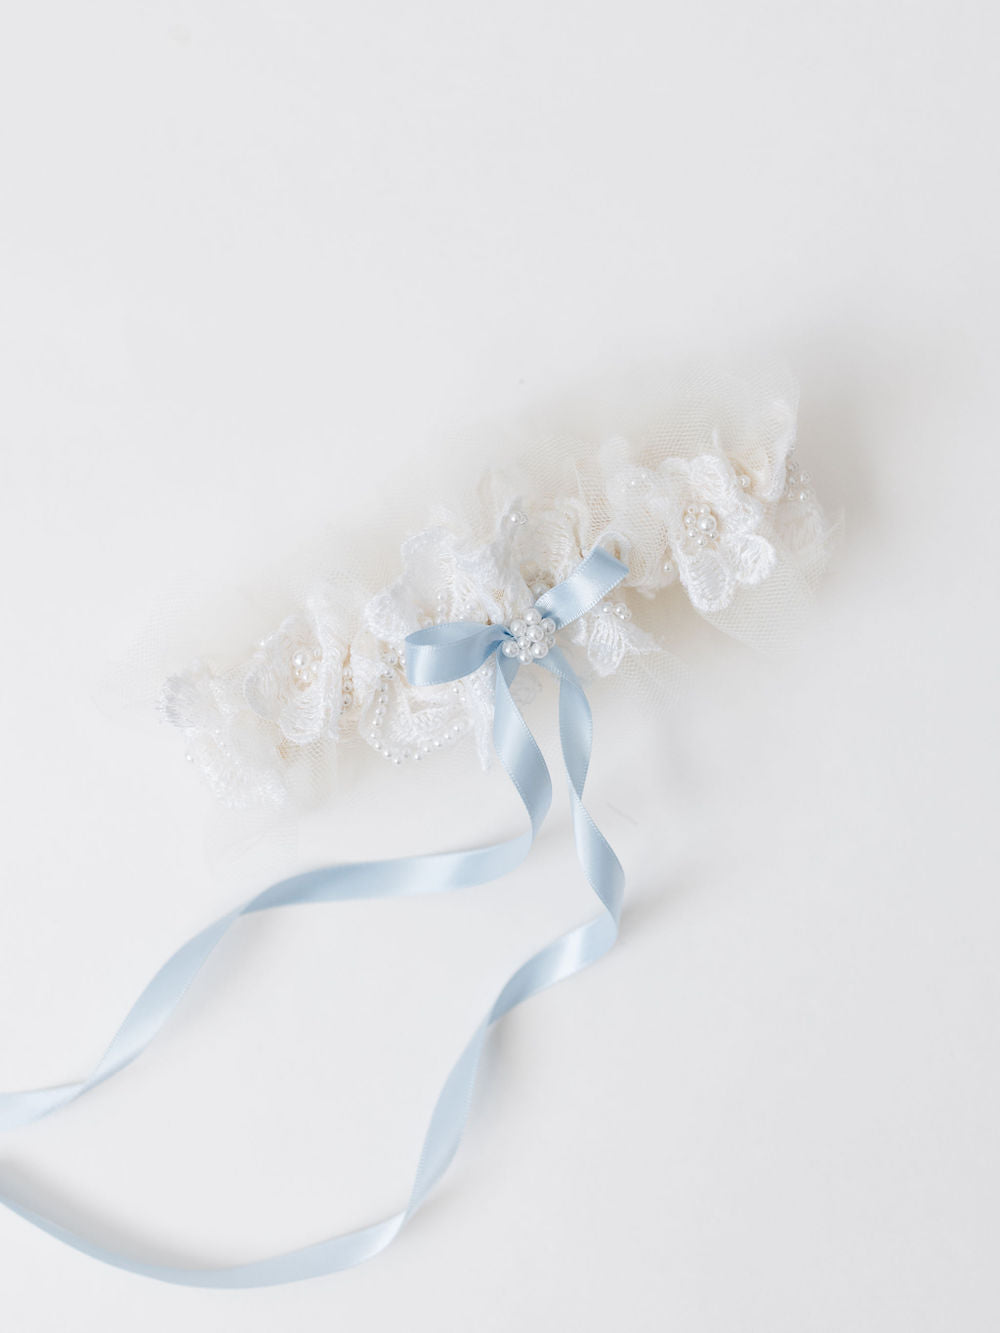 wedding garter heirloom with long blue center bow created from mom's wedding dress handcrafted by The Garter Girl